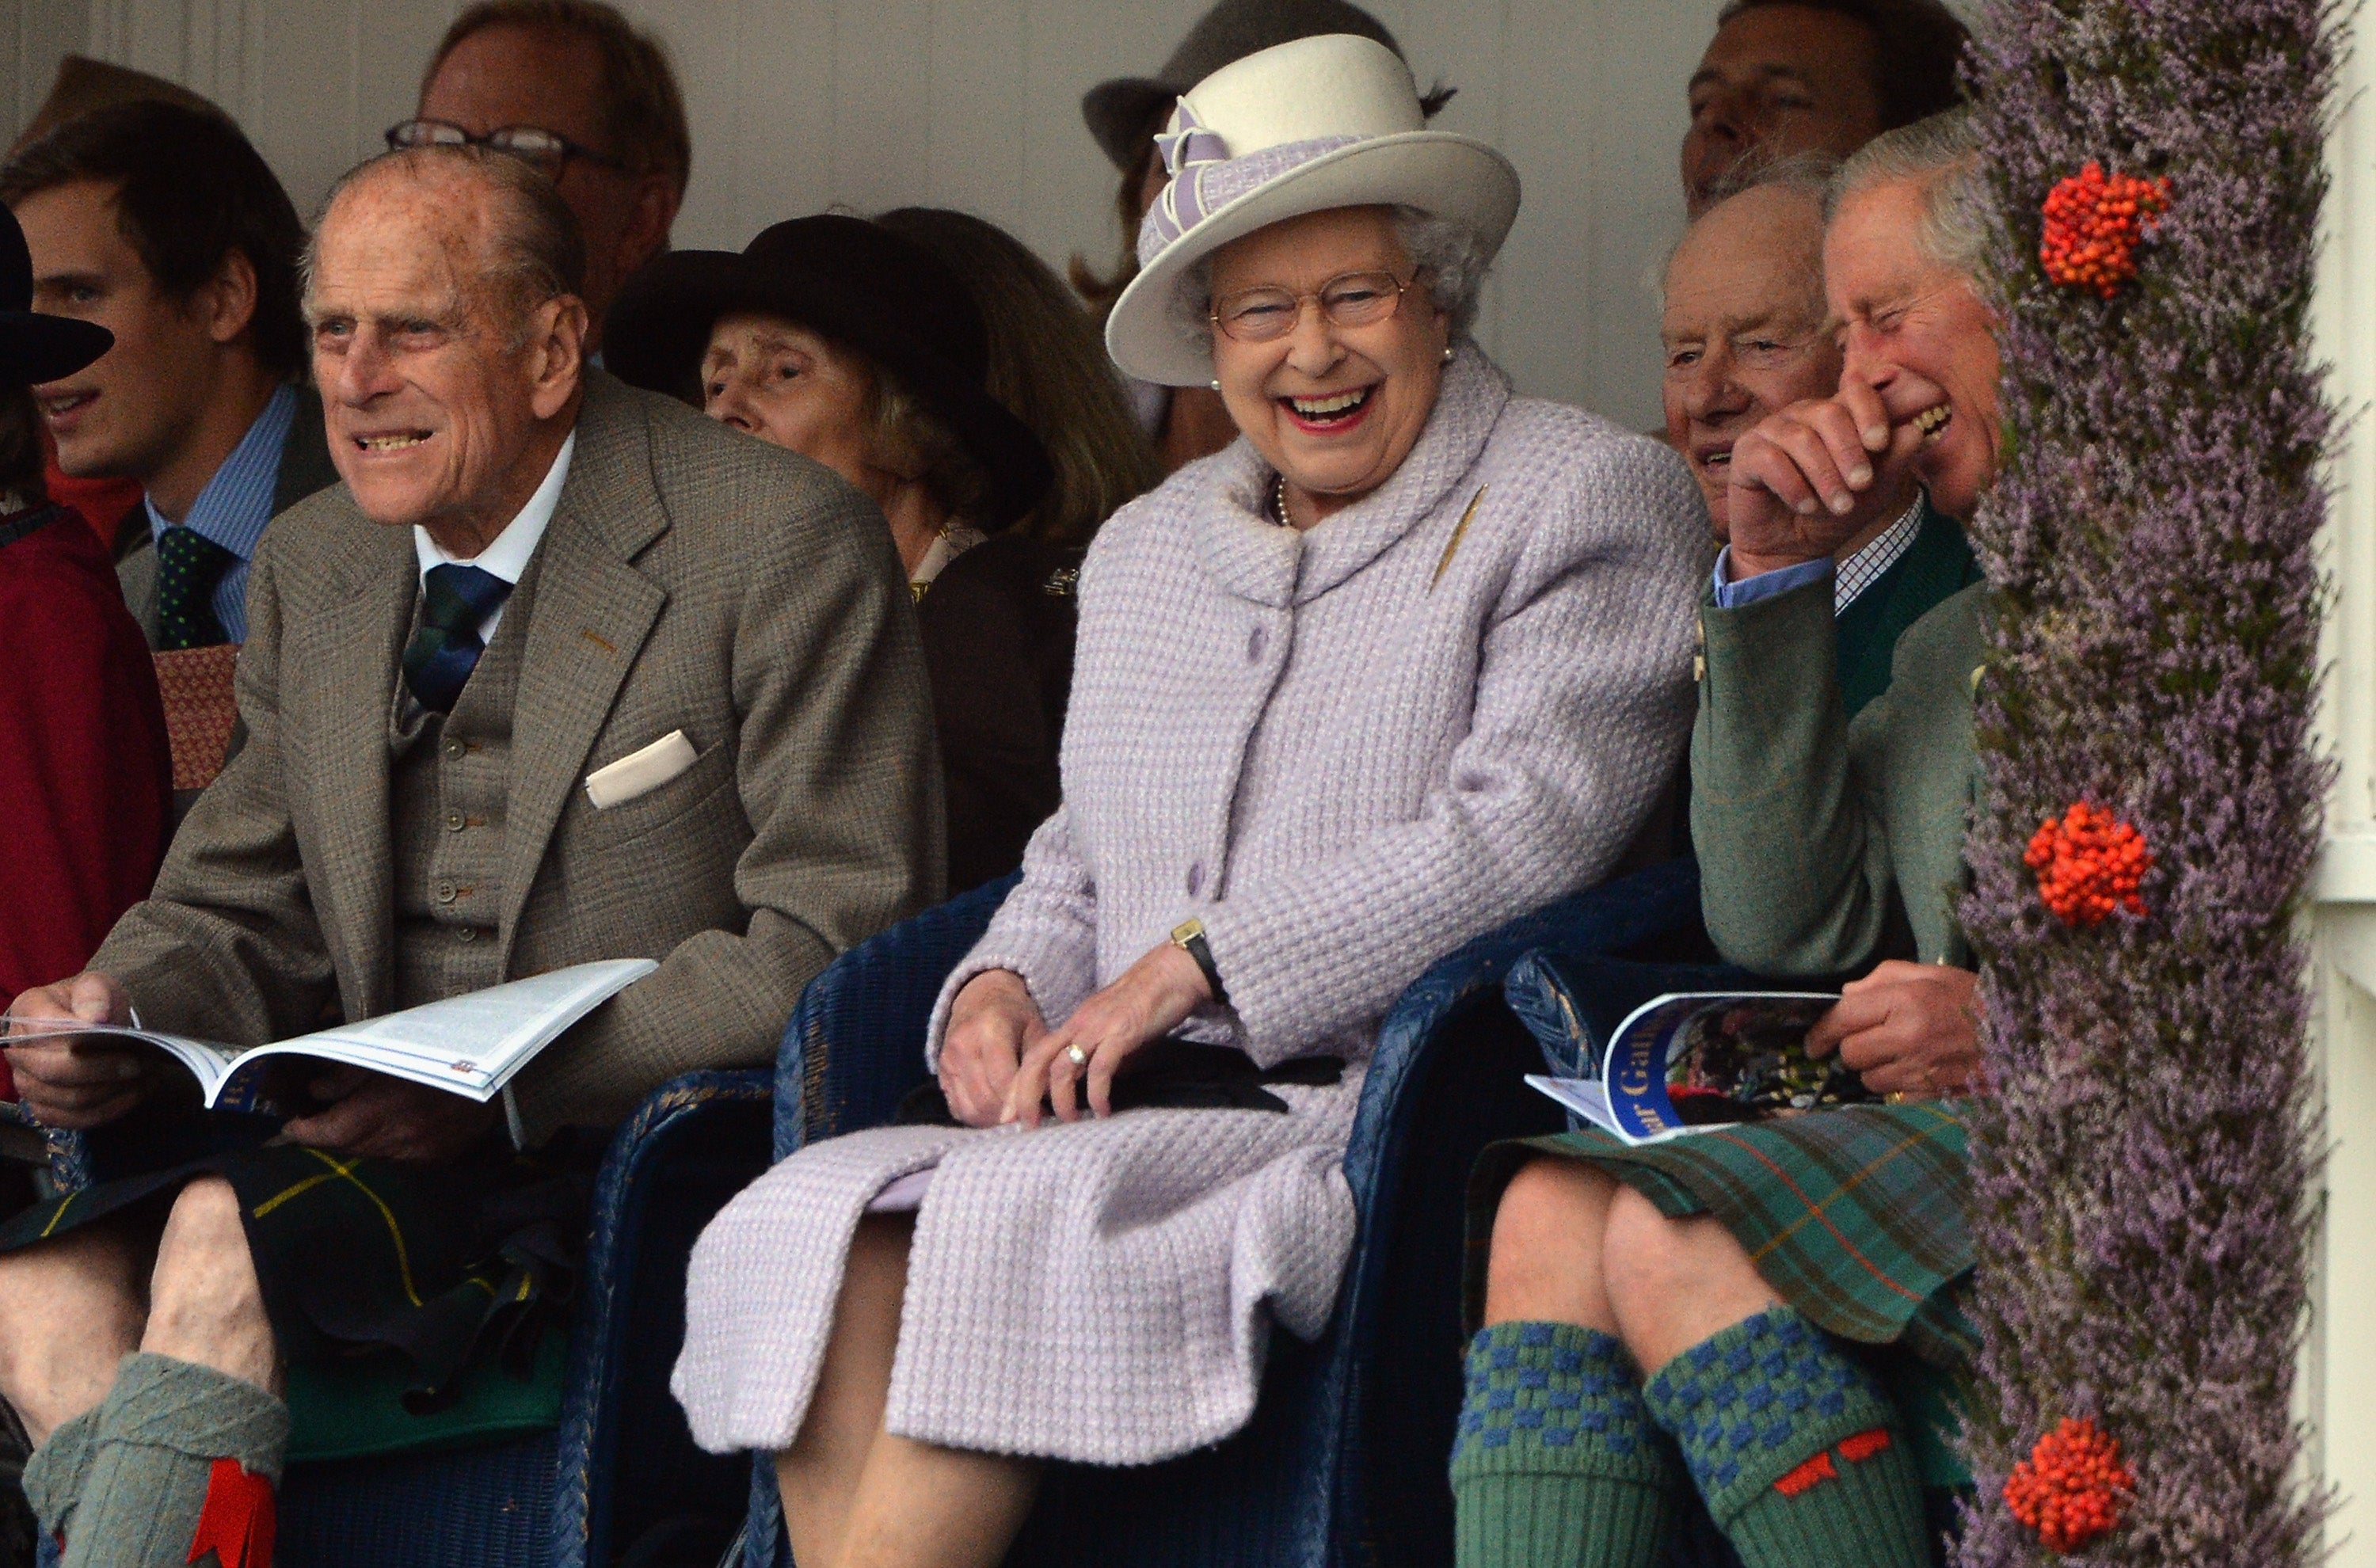 Members of Britain's royal family (front left to right) Prince Philip, Queen Elizabeth and Prince Charles cheer as competitors participate in a sack race at the Braemar Gathering in Braemar, Scotland, 2012